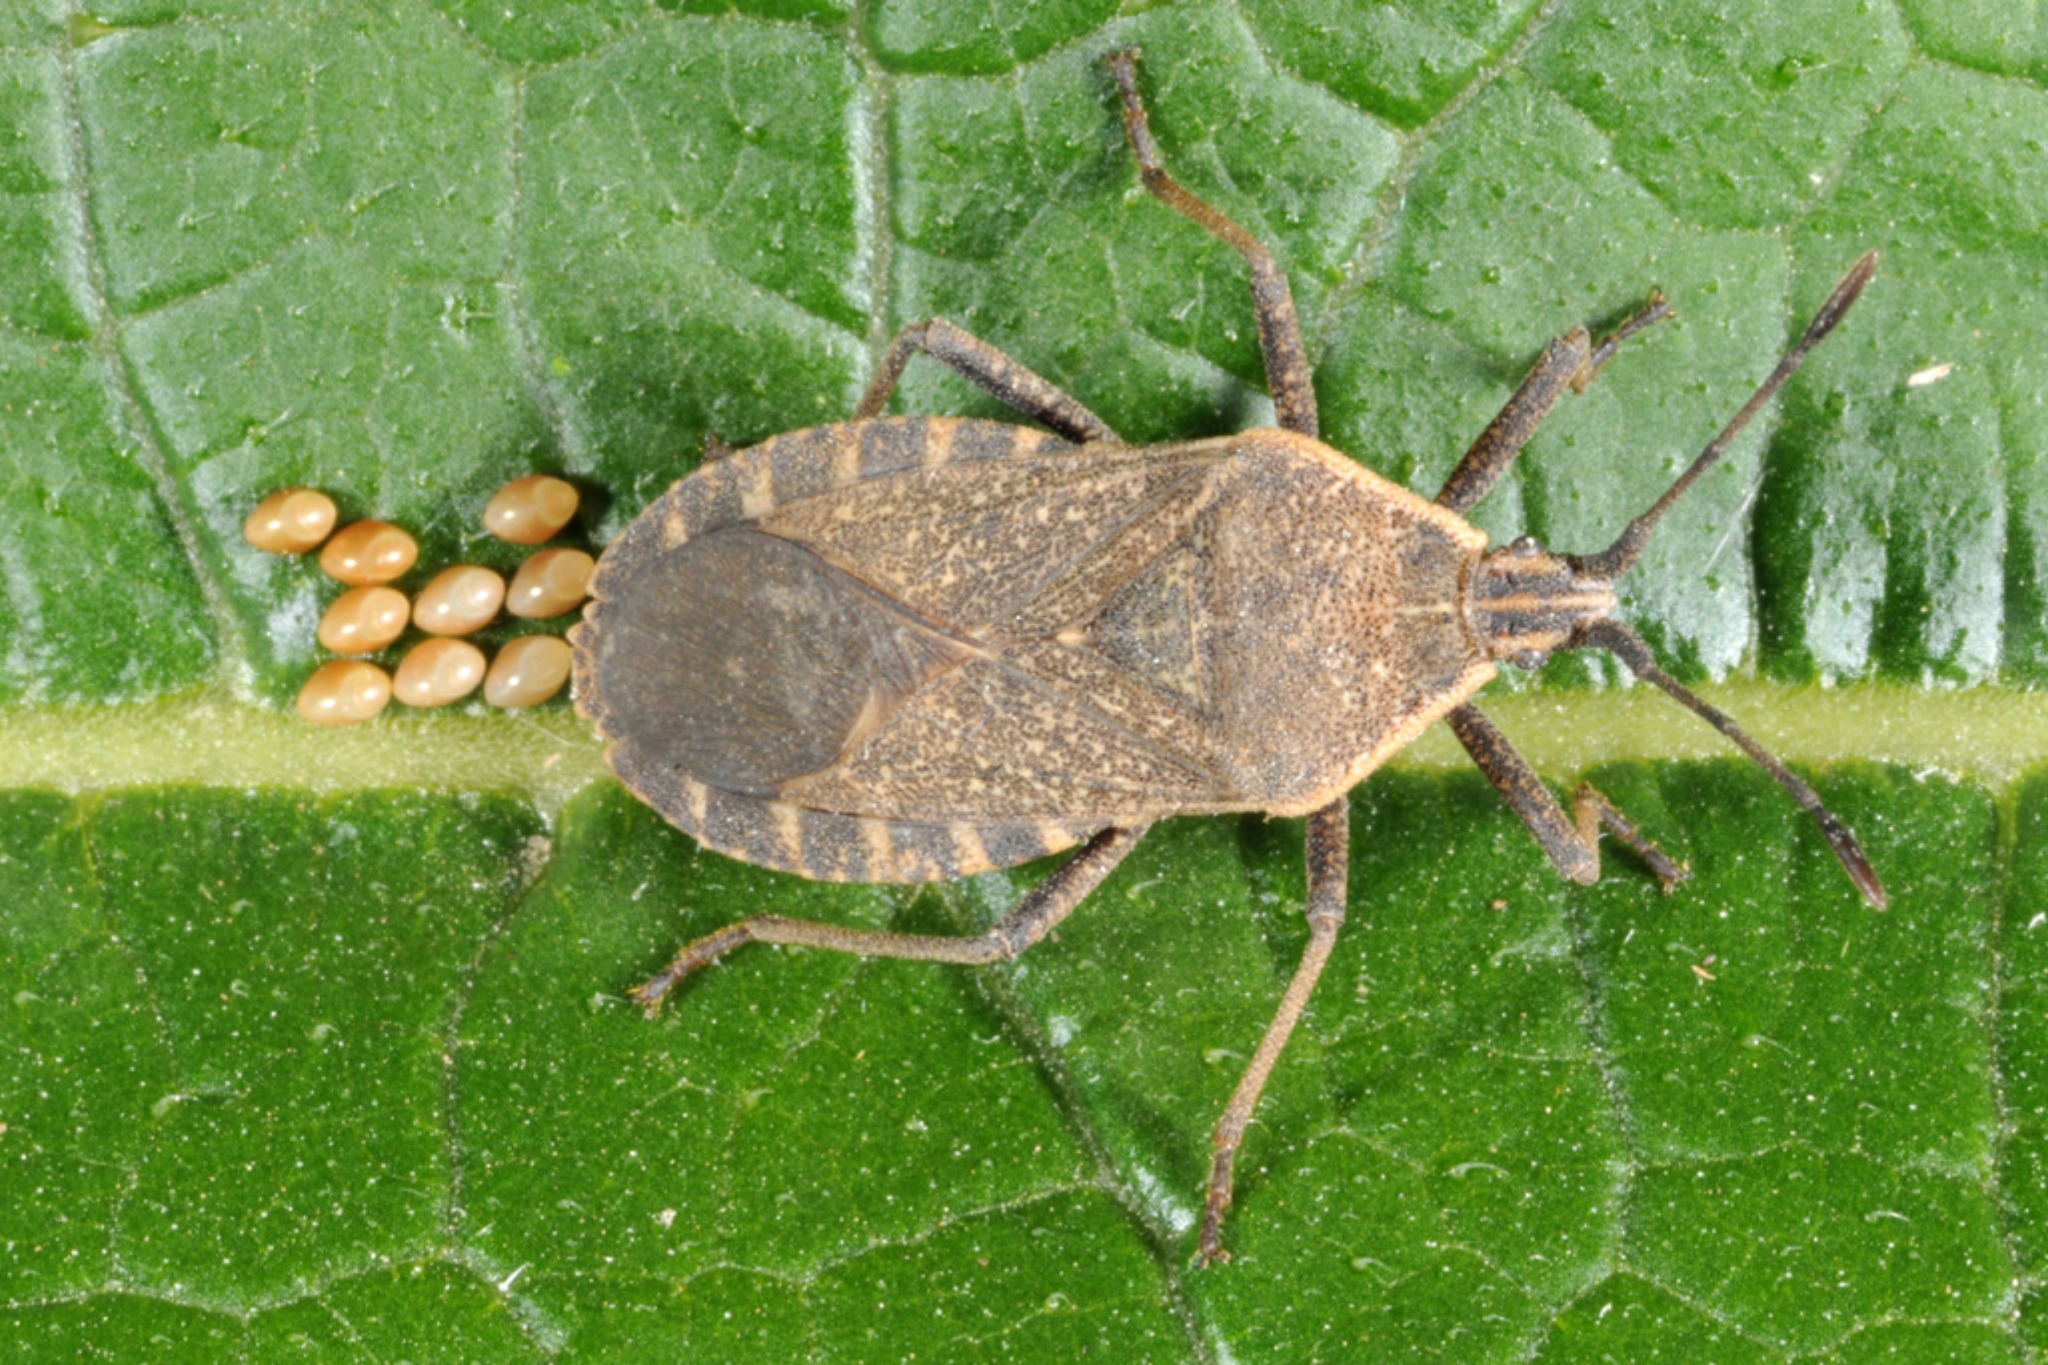 Squash Bug with eggs